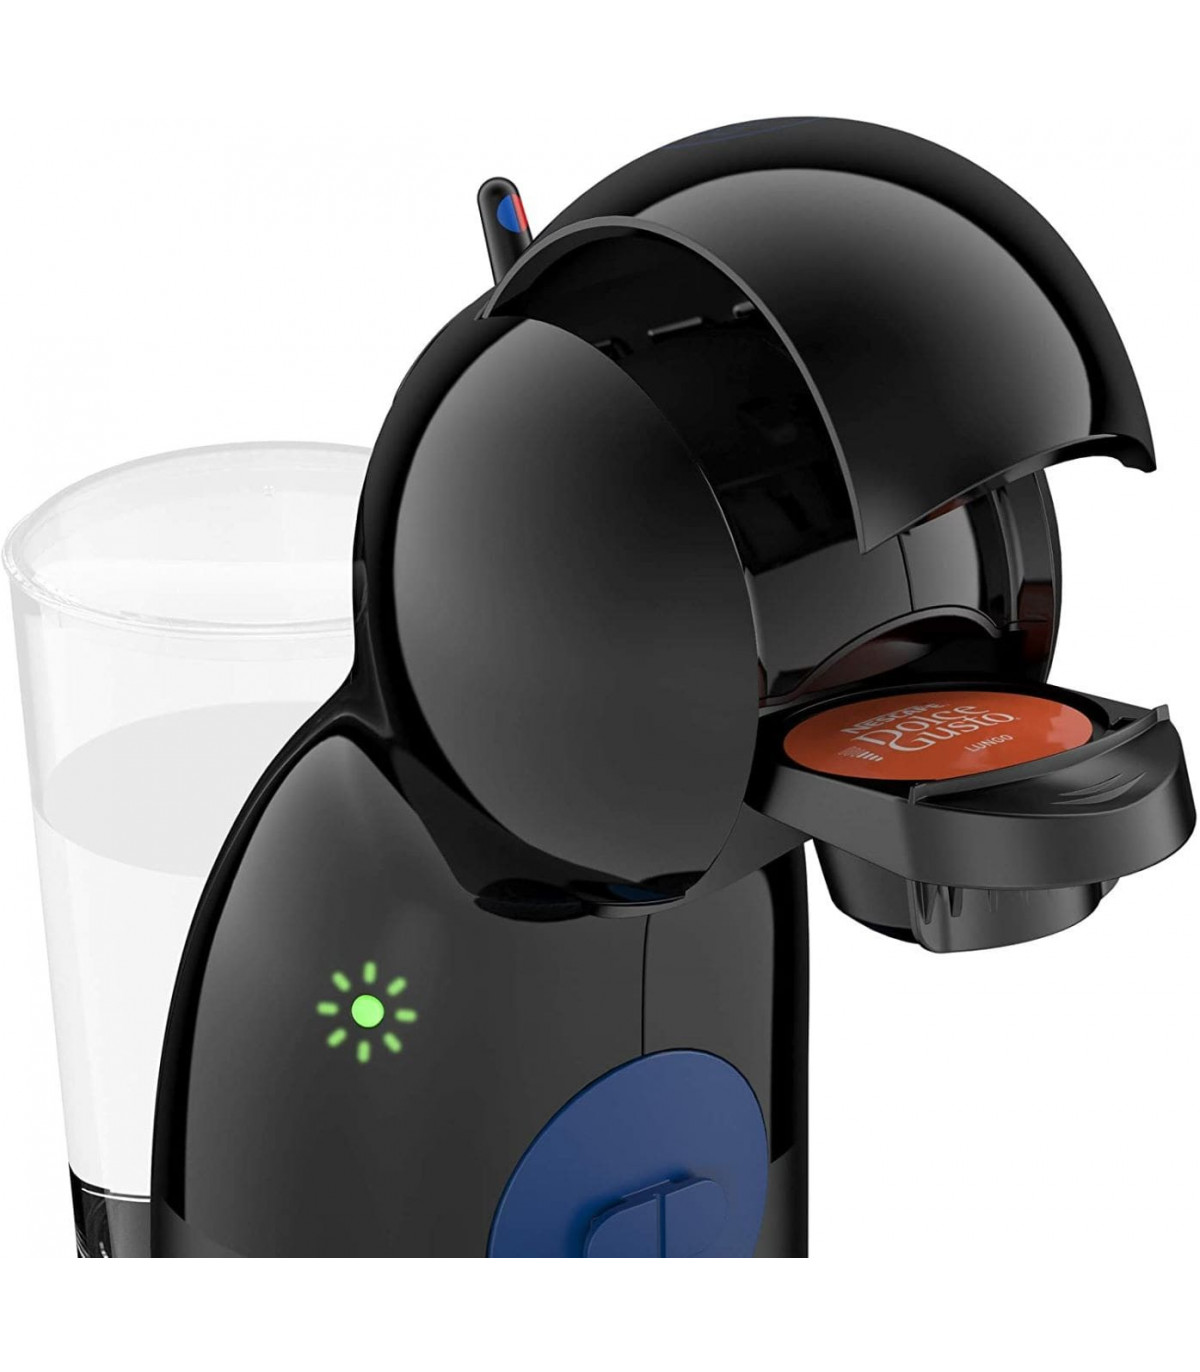 CAFETERA KRUPS KP1A08 XS DOLCE GUSTO + 3 Pack Café - Canarias